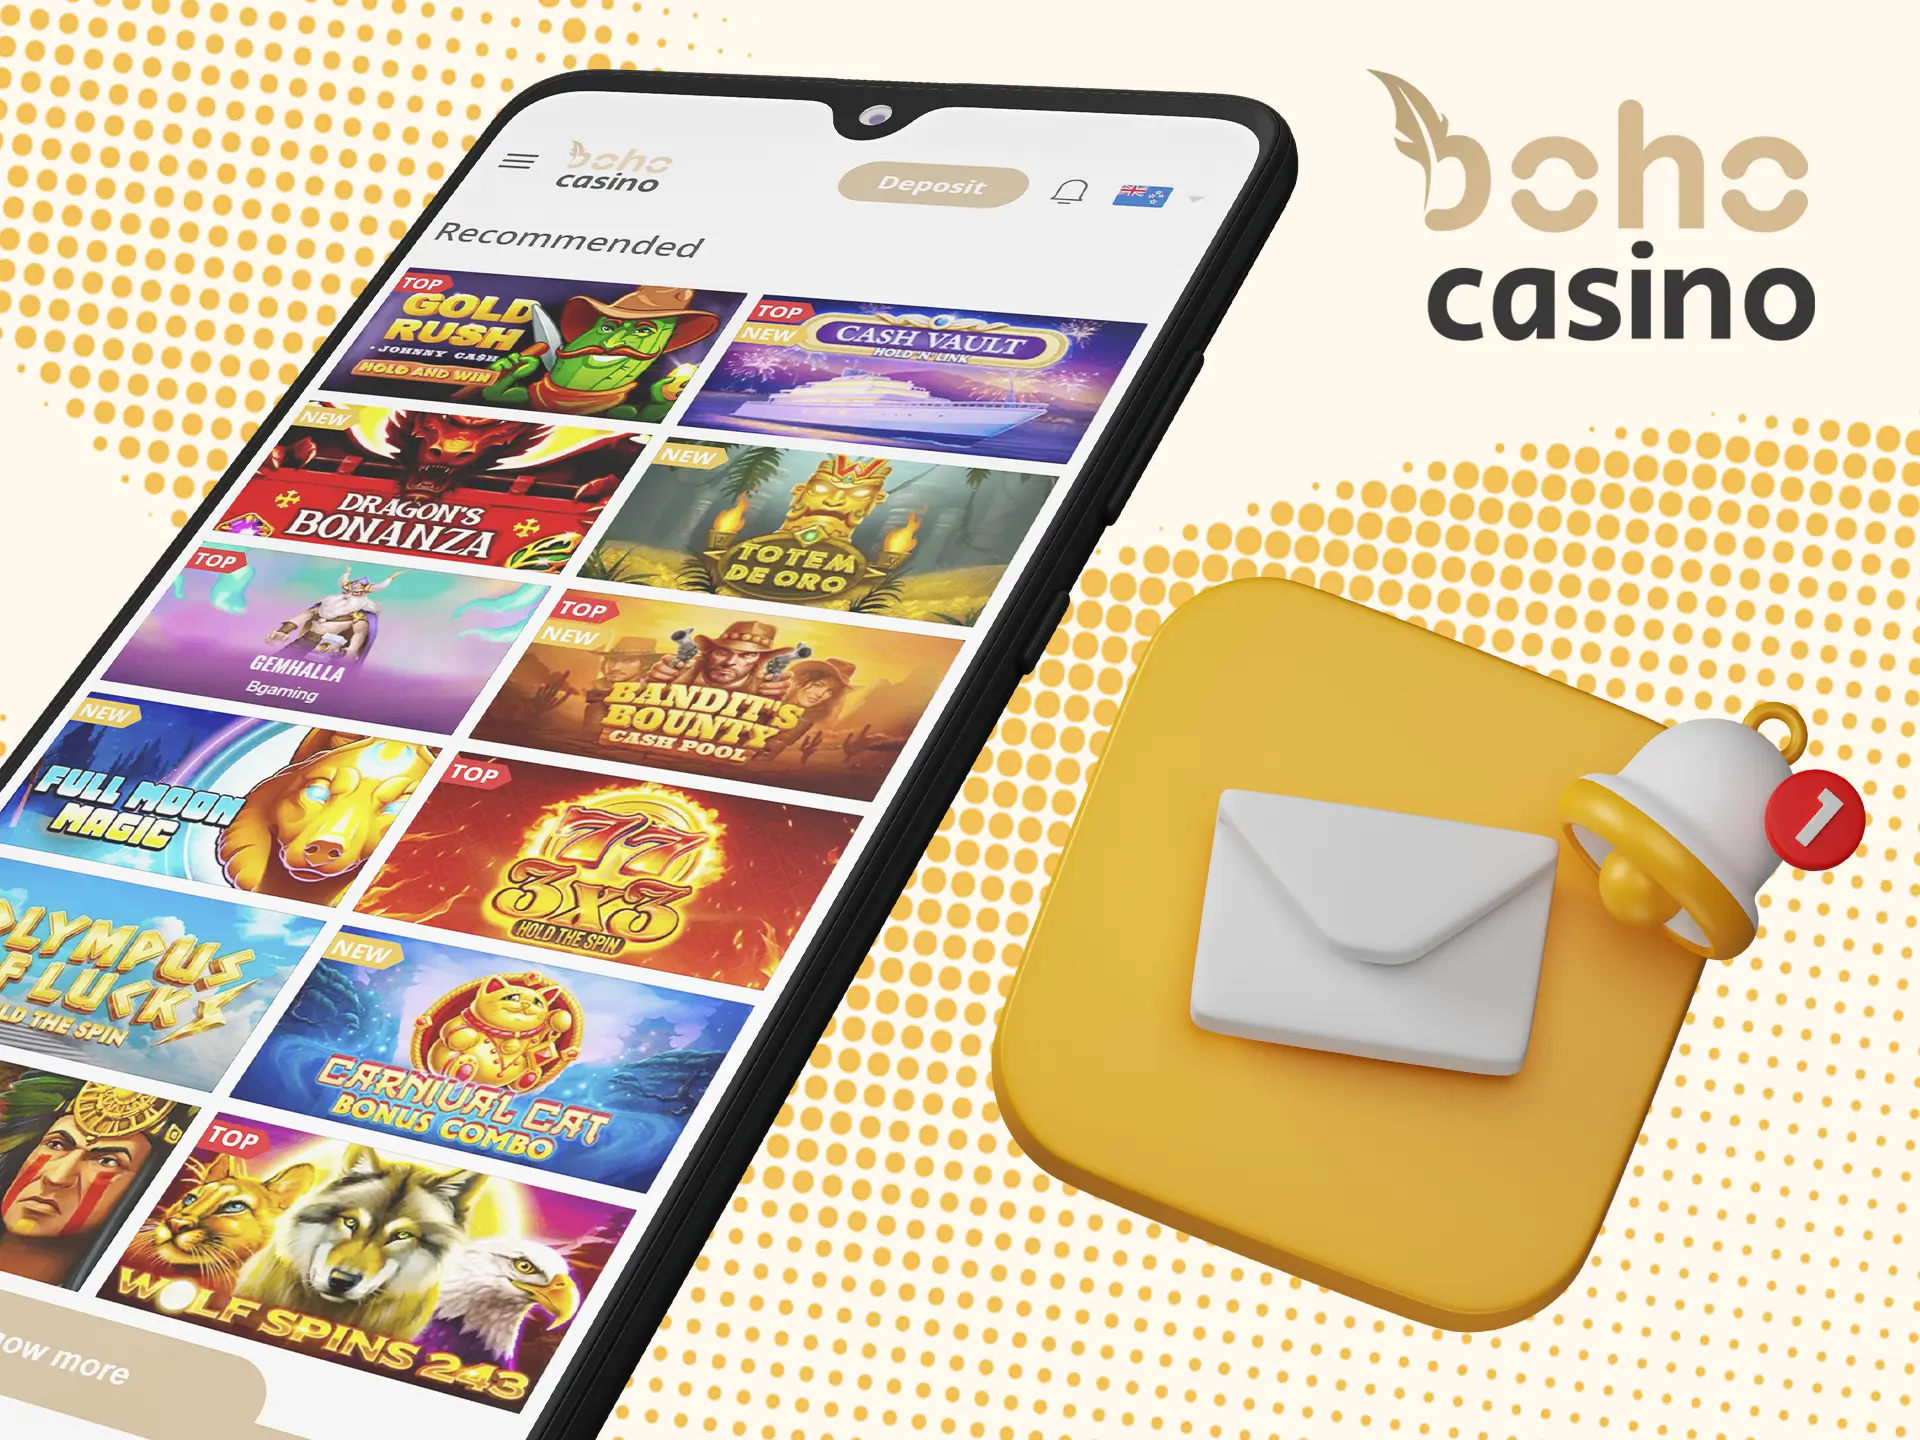 Don't forget to turn on Boho Casino app notifications to know about promotions and bonuses.